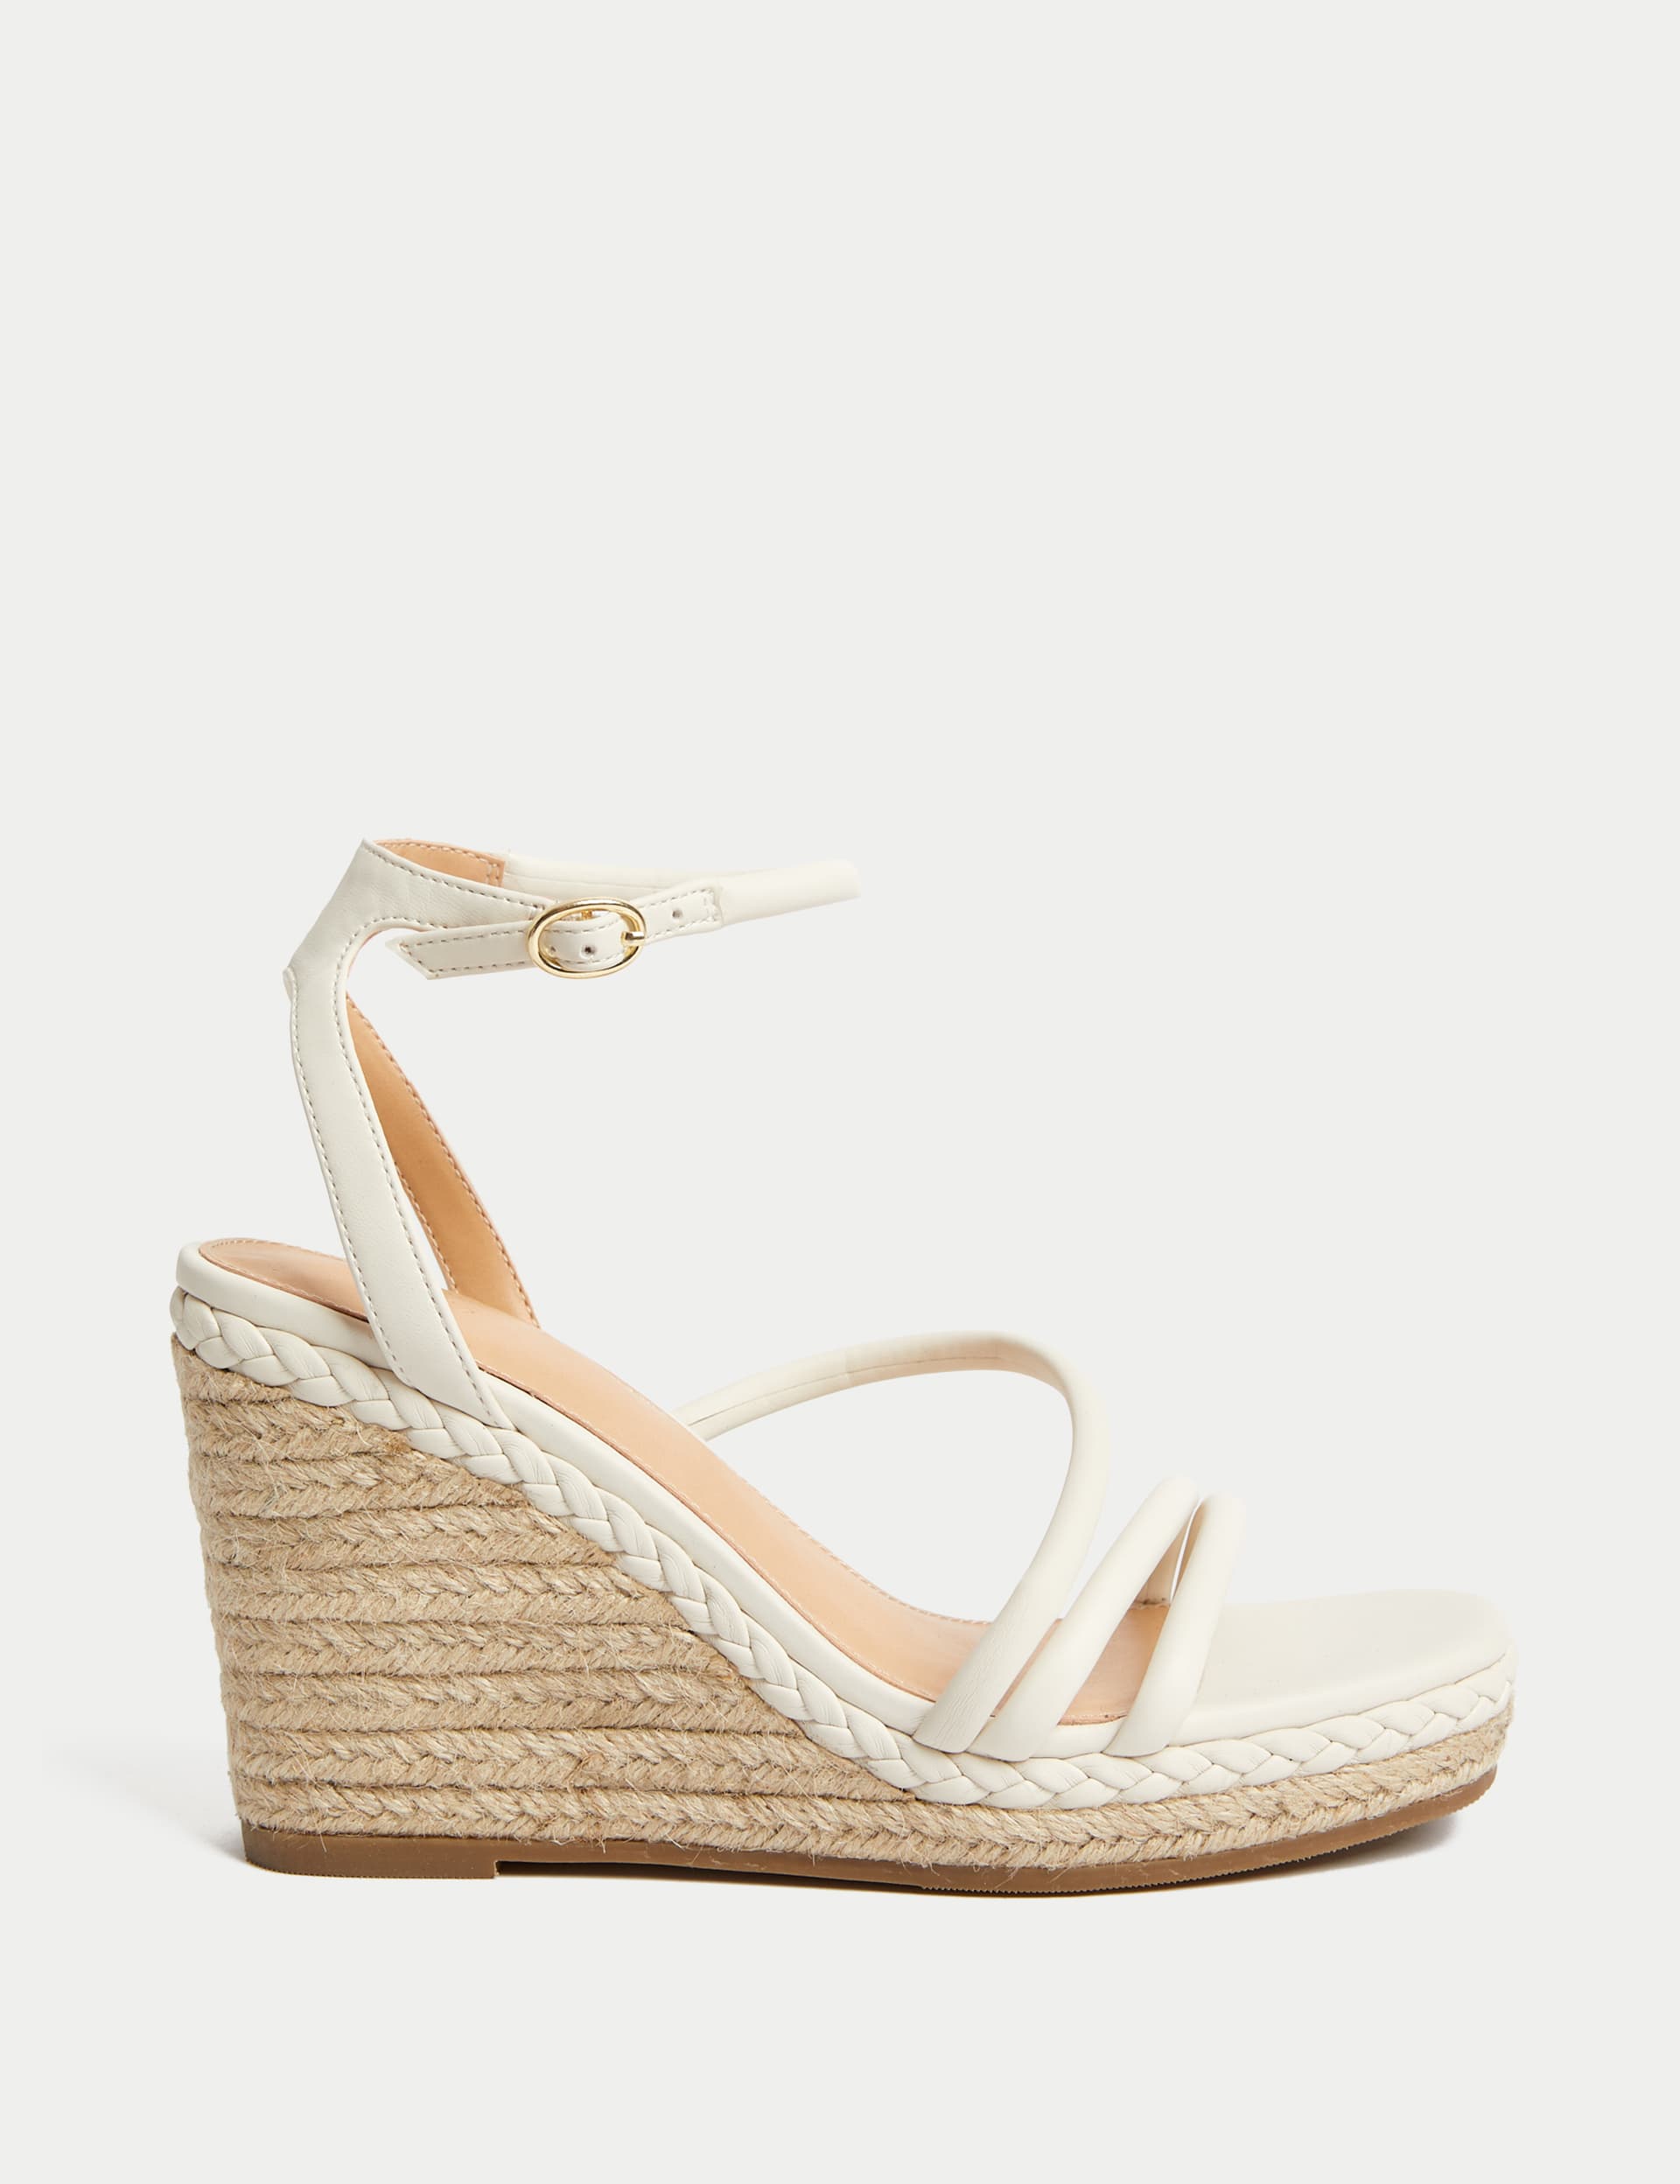 Buckle Strappy Wedge Espadrilles